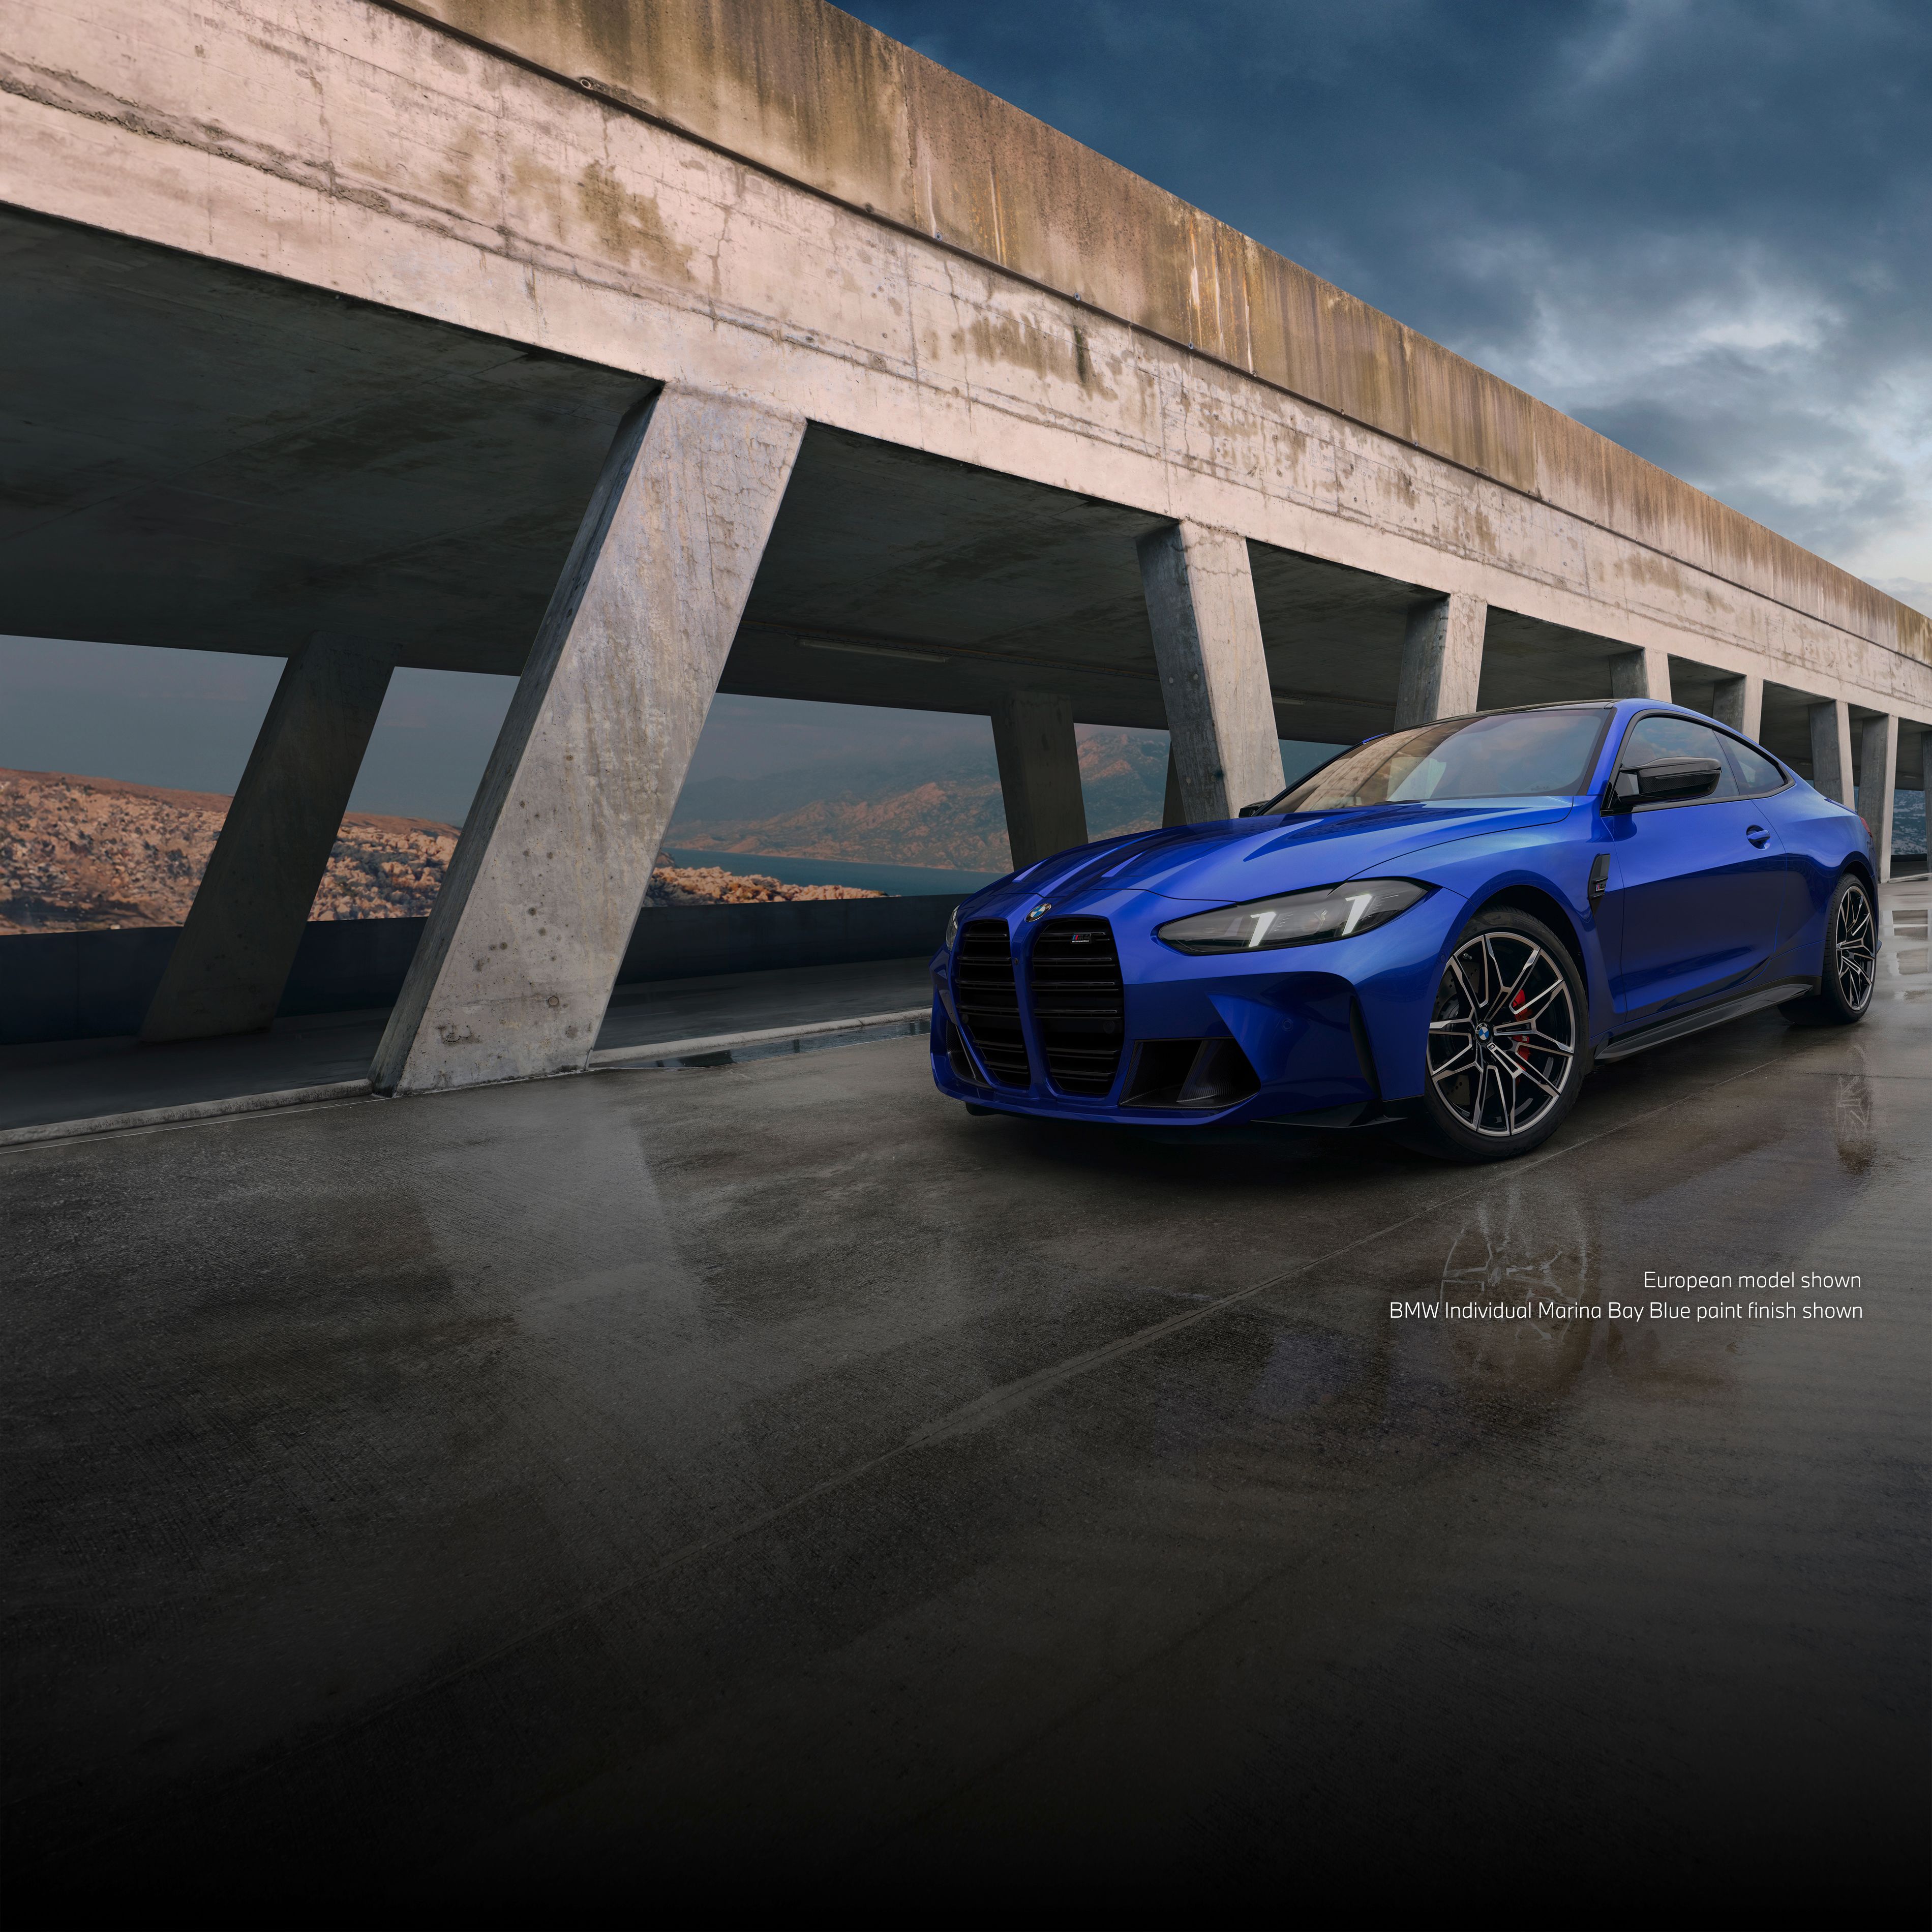 BMW M4 Competition Coupe in BMW Individual Marina Bay Blue paint finish